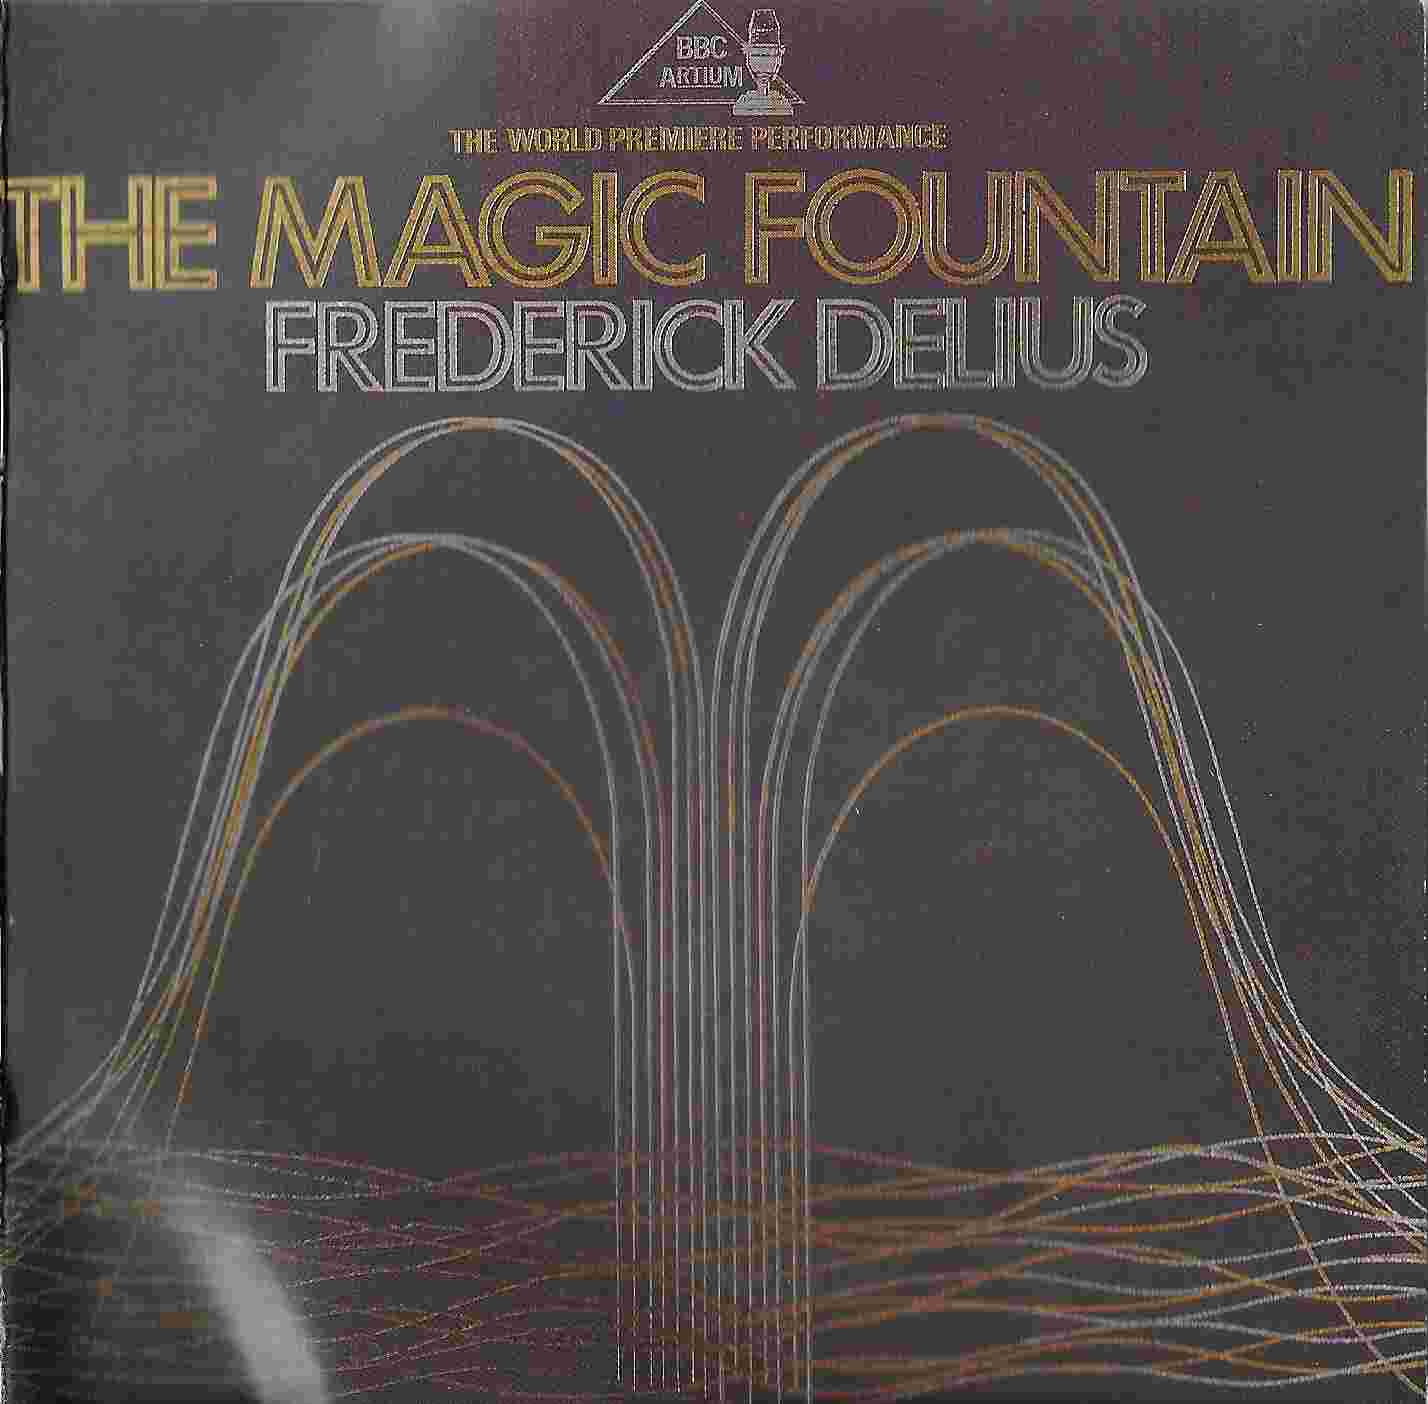 Picture of The magic fountain / Margot La Rouge by artist Frederic Delius from the BBC cds - Records and Tapes library